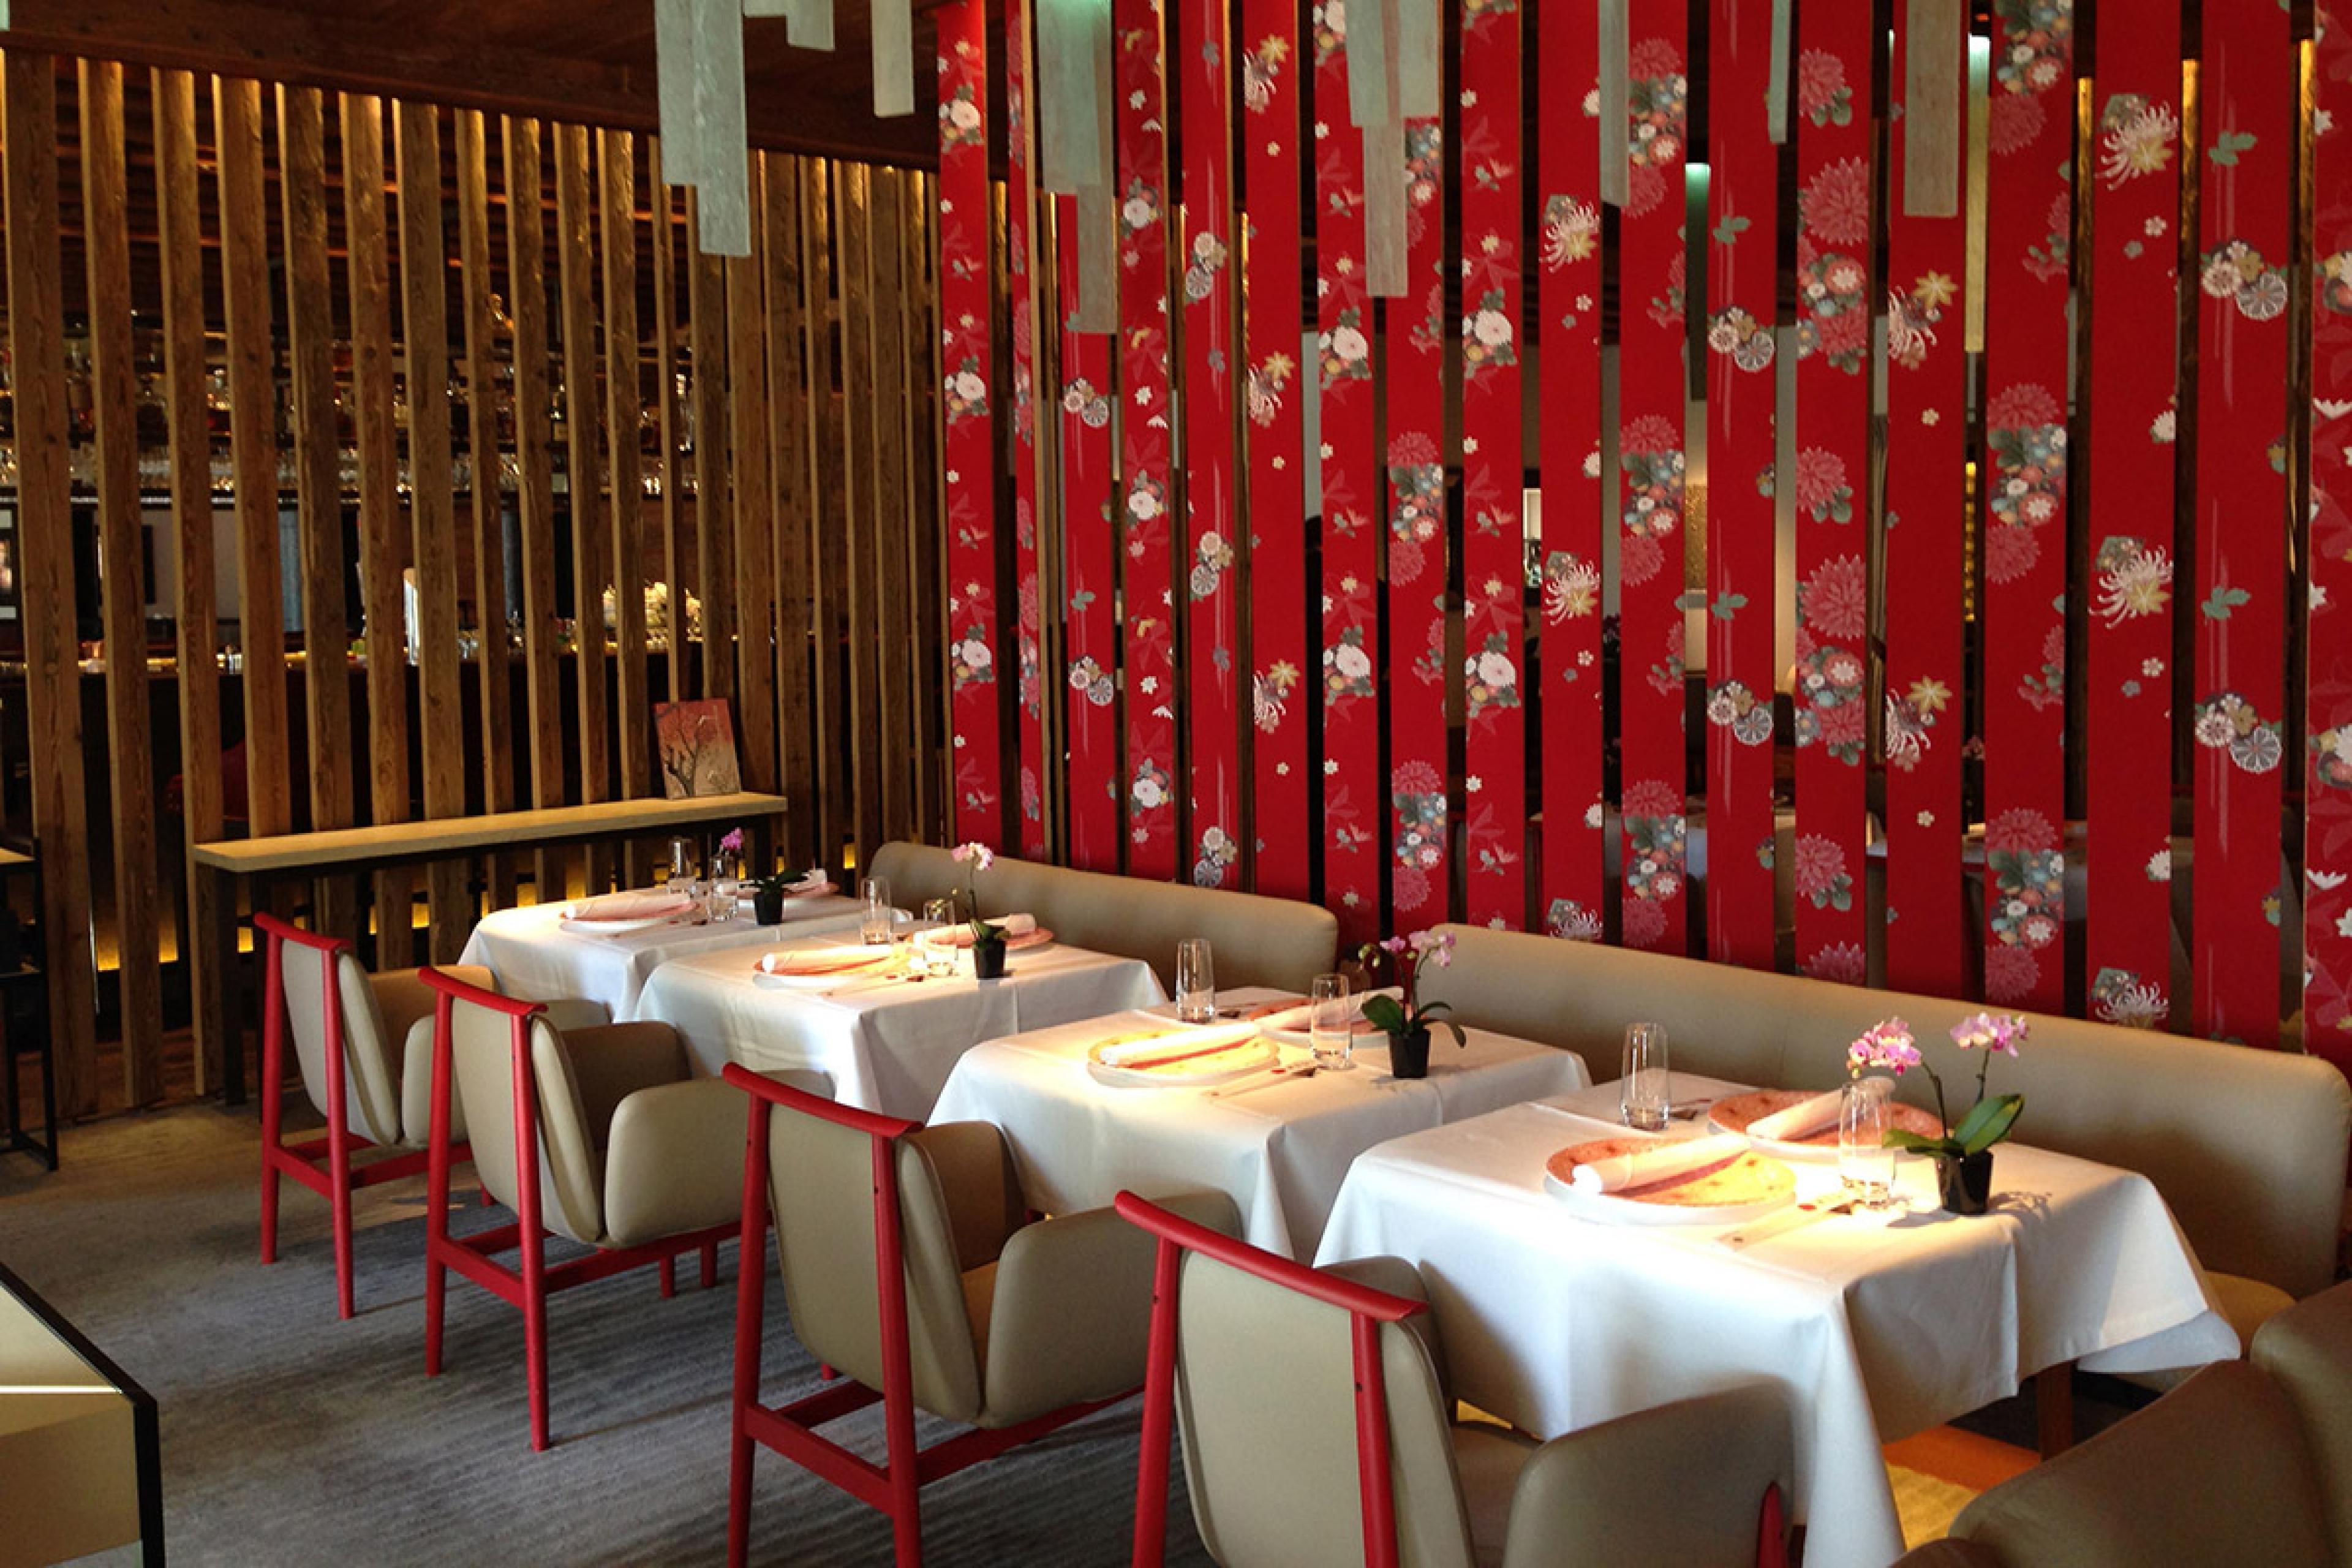 dining room at a formal contemporary restaurant with red wall art and white tablecloths